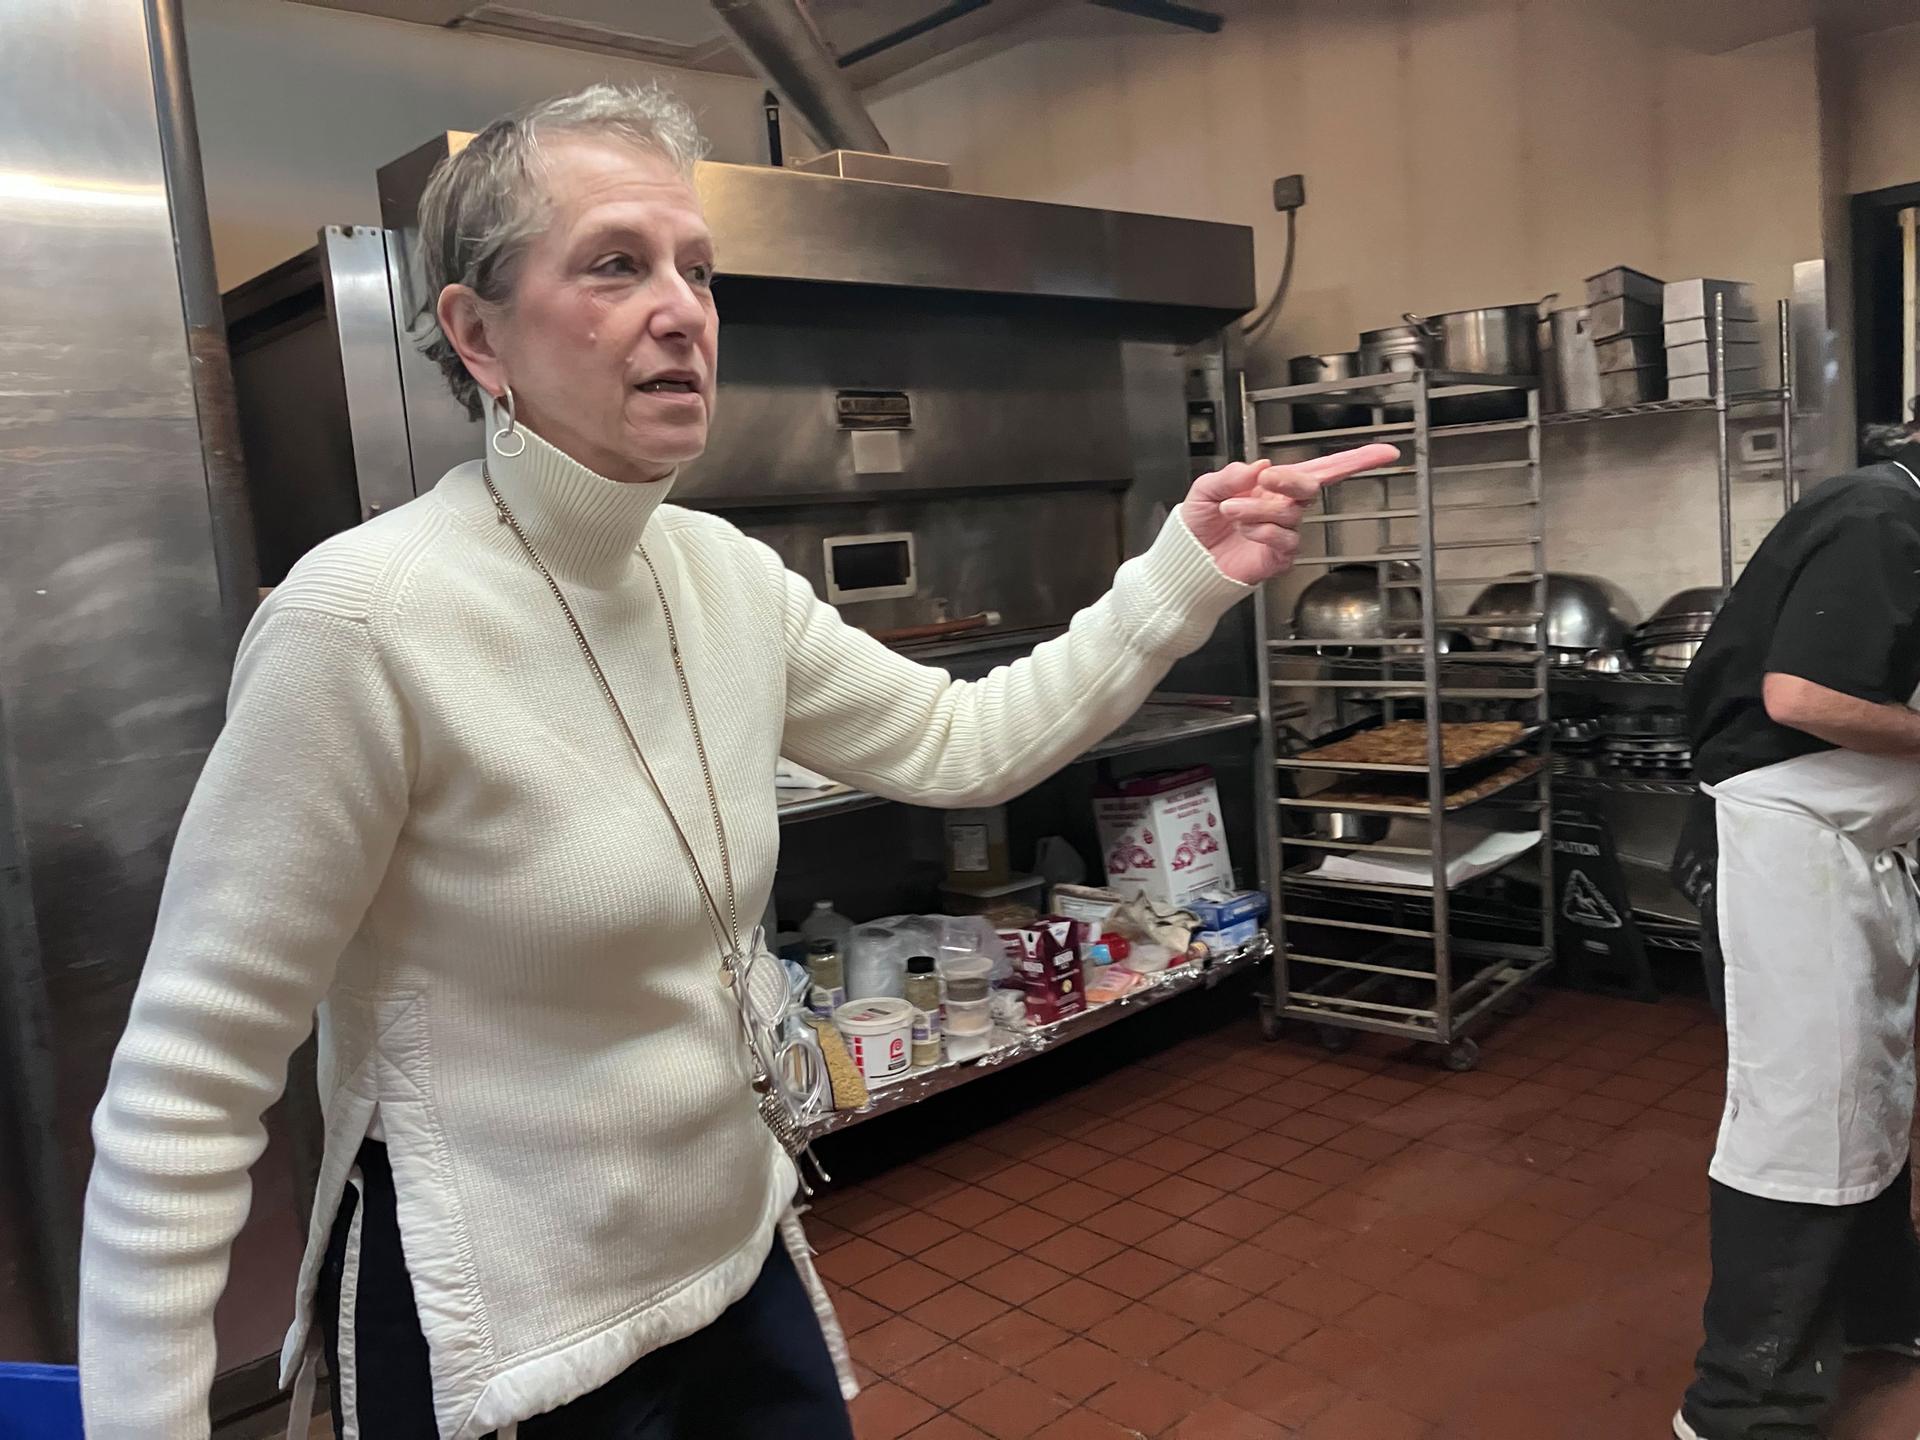 Bette Dworkin has been the owner of Kaufman's Bagel and Delicatessen for 30 years. She took on the business from her parents.